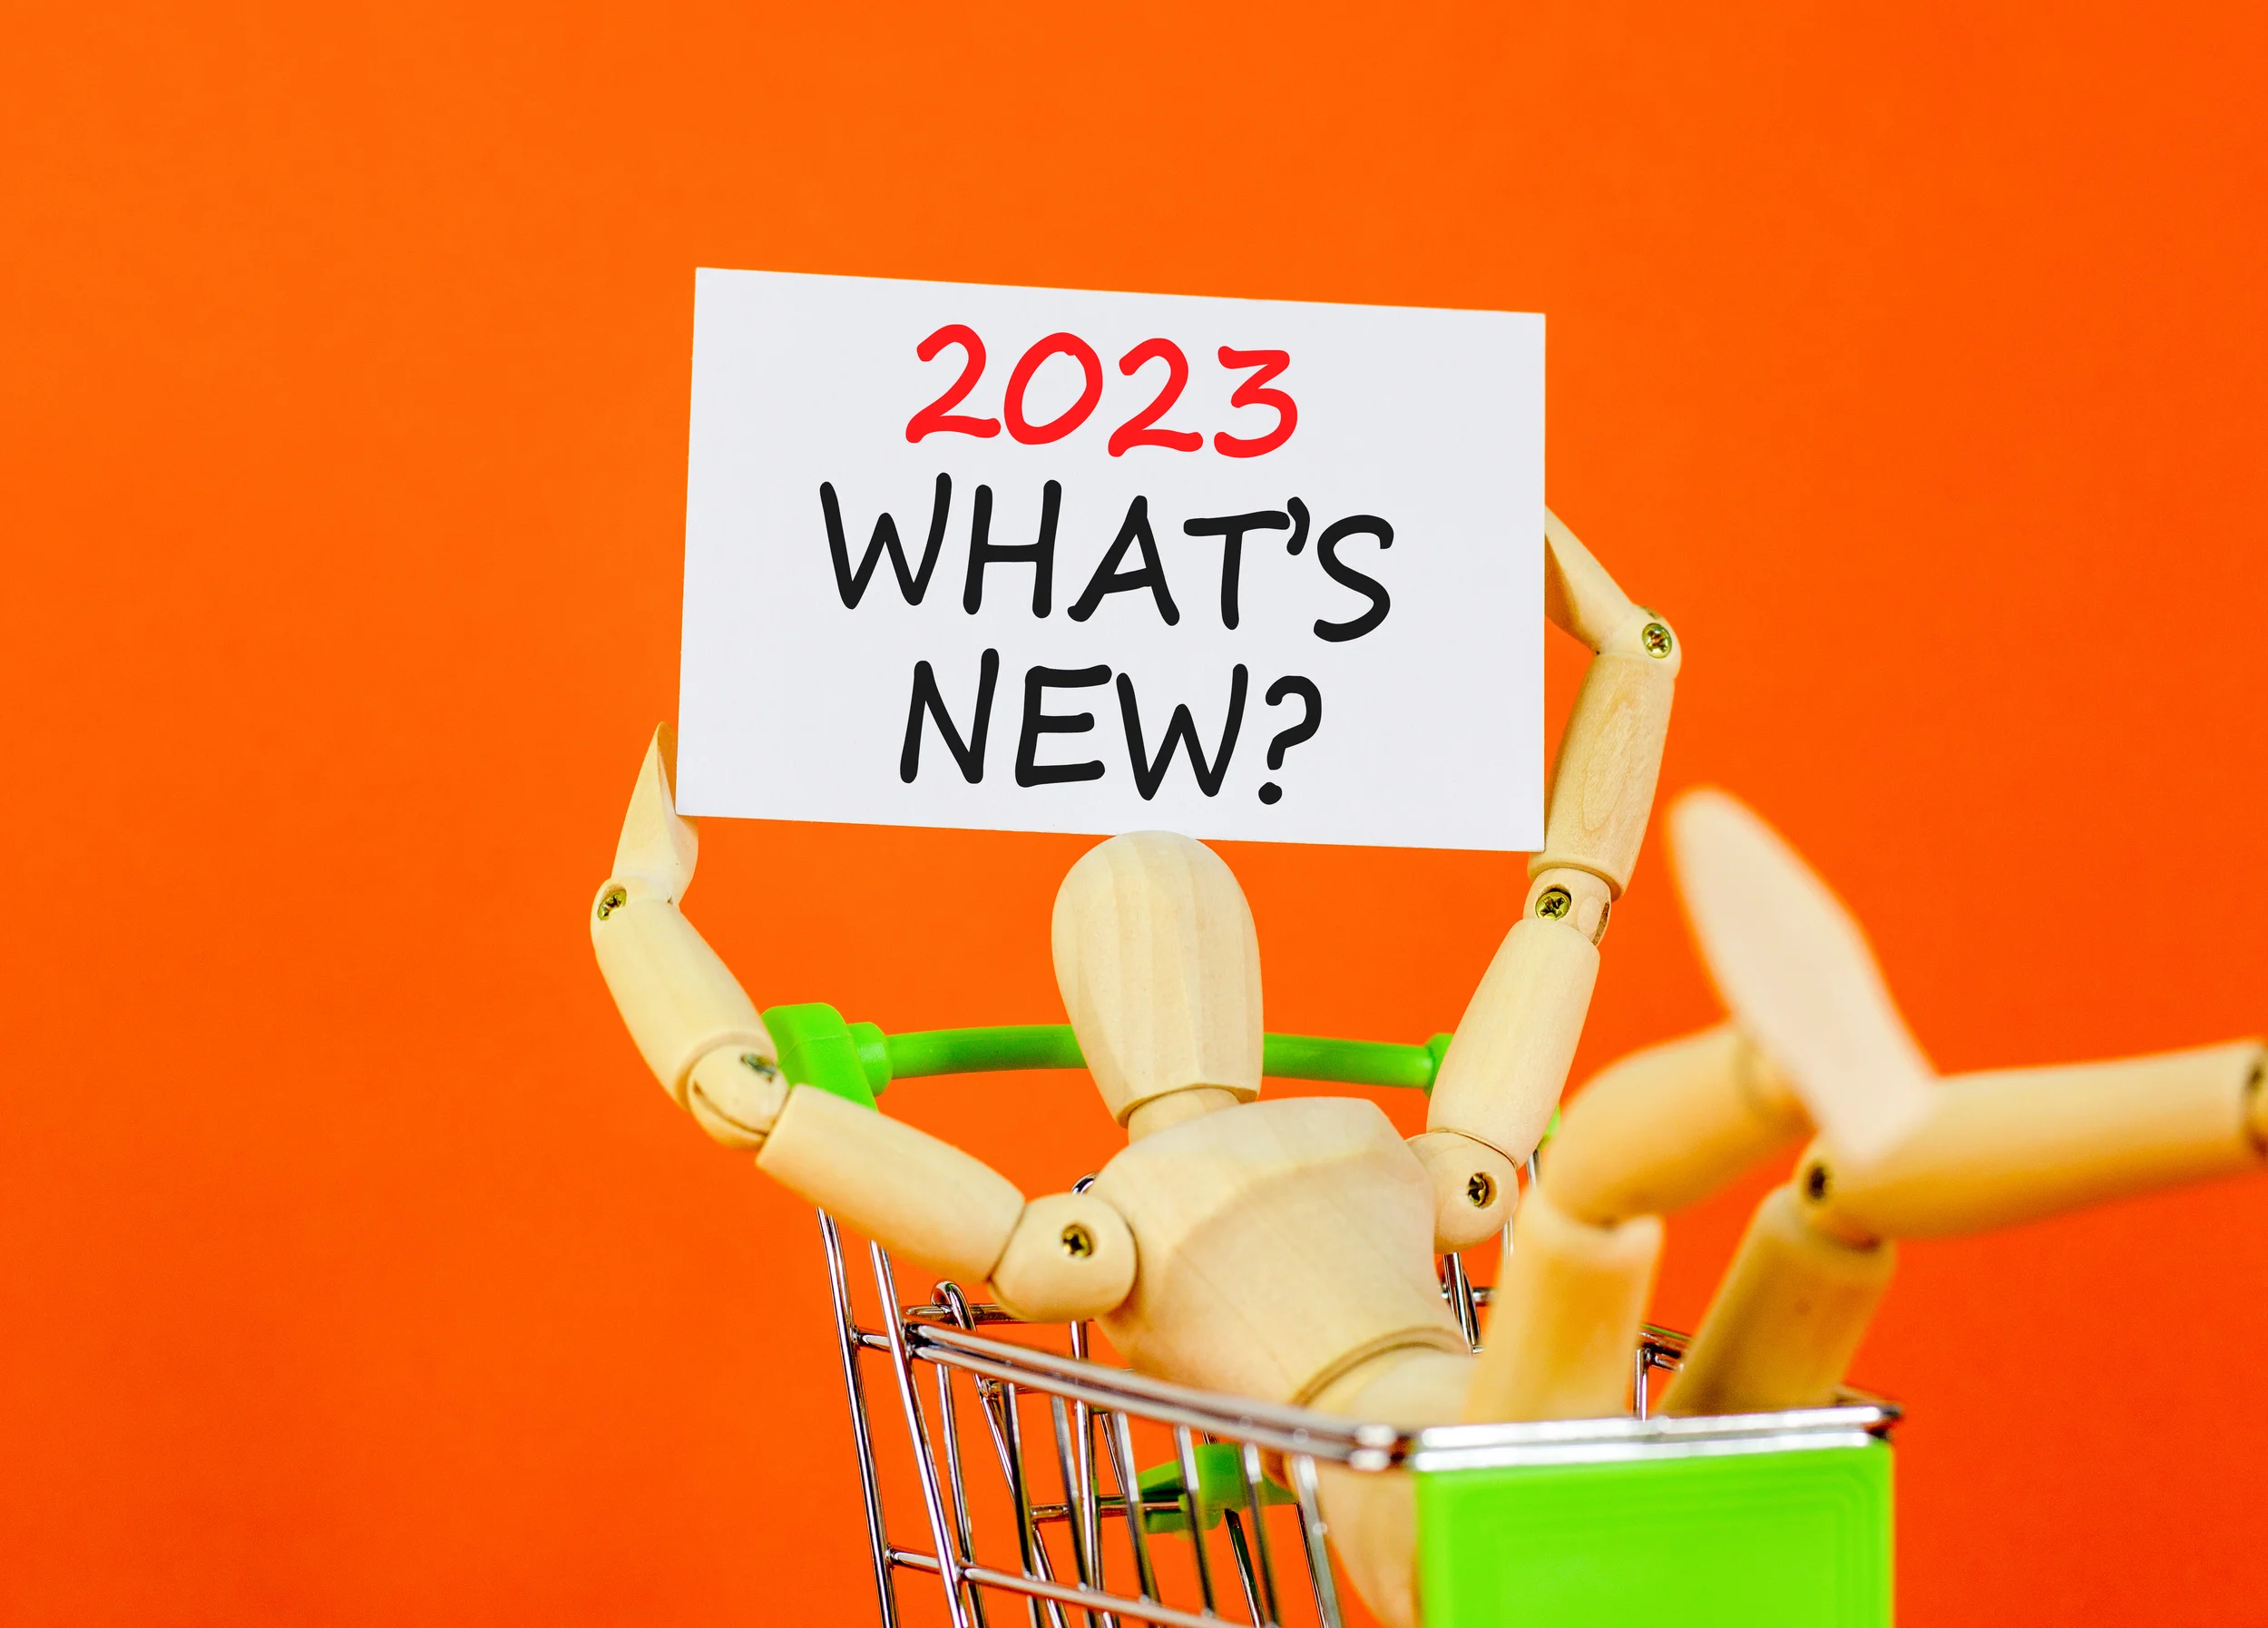 What's New in 2023 sign